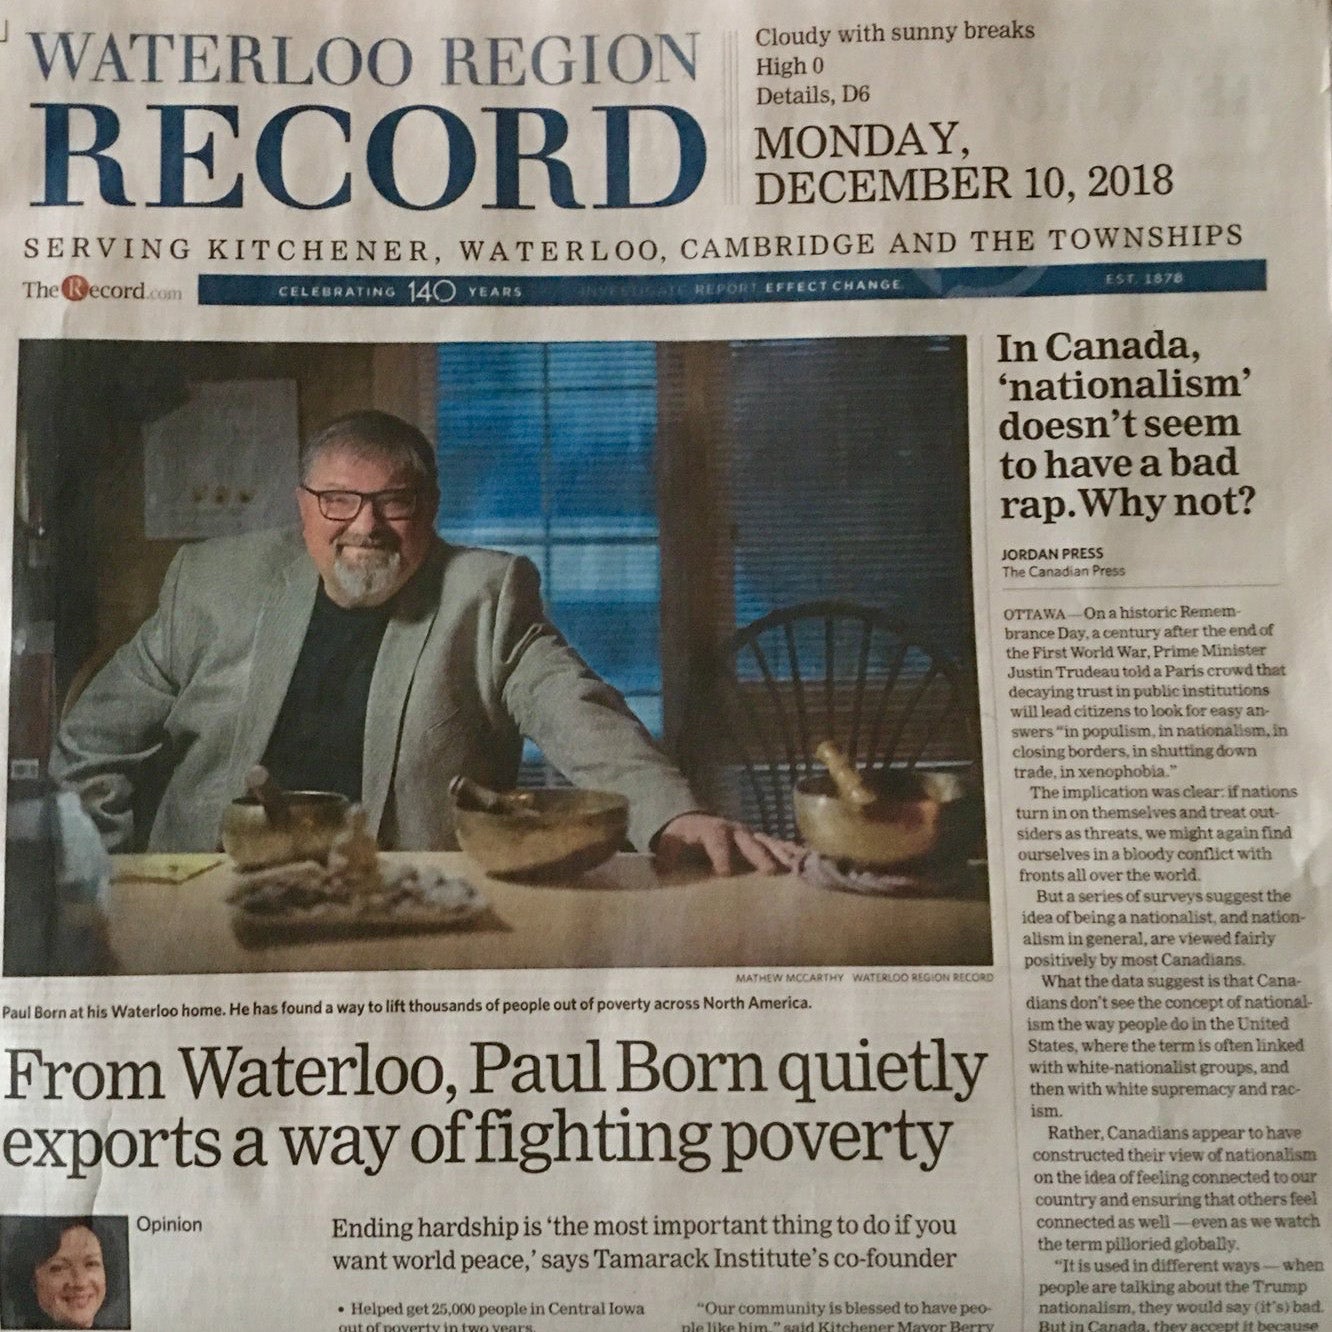 Newspaper with Paul Born on the cover.